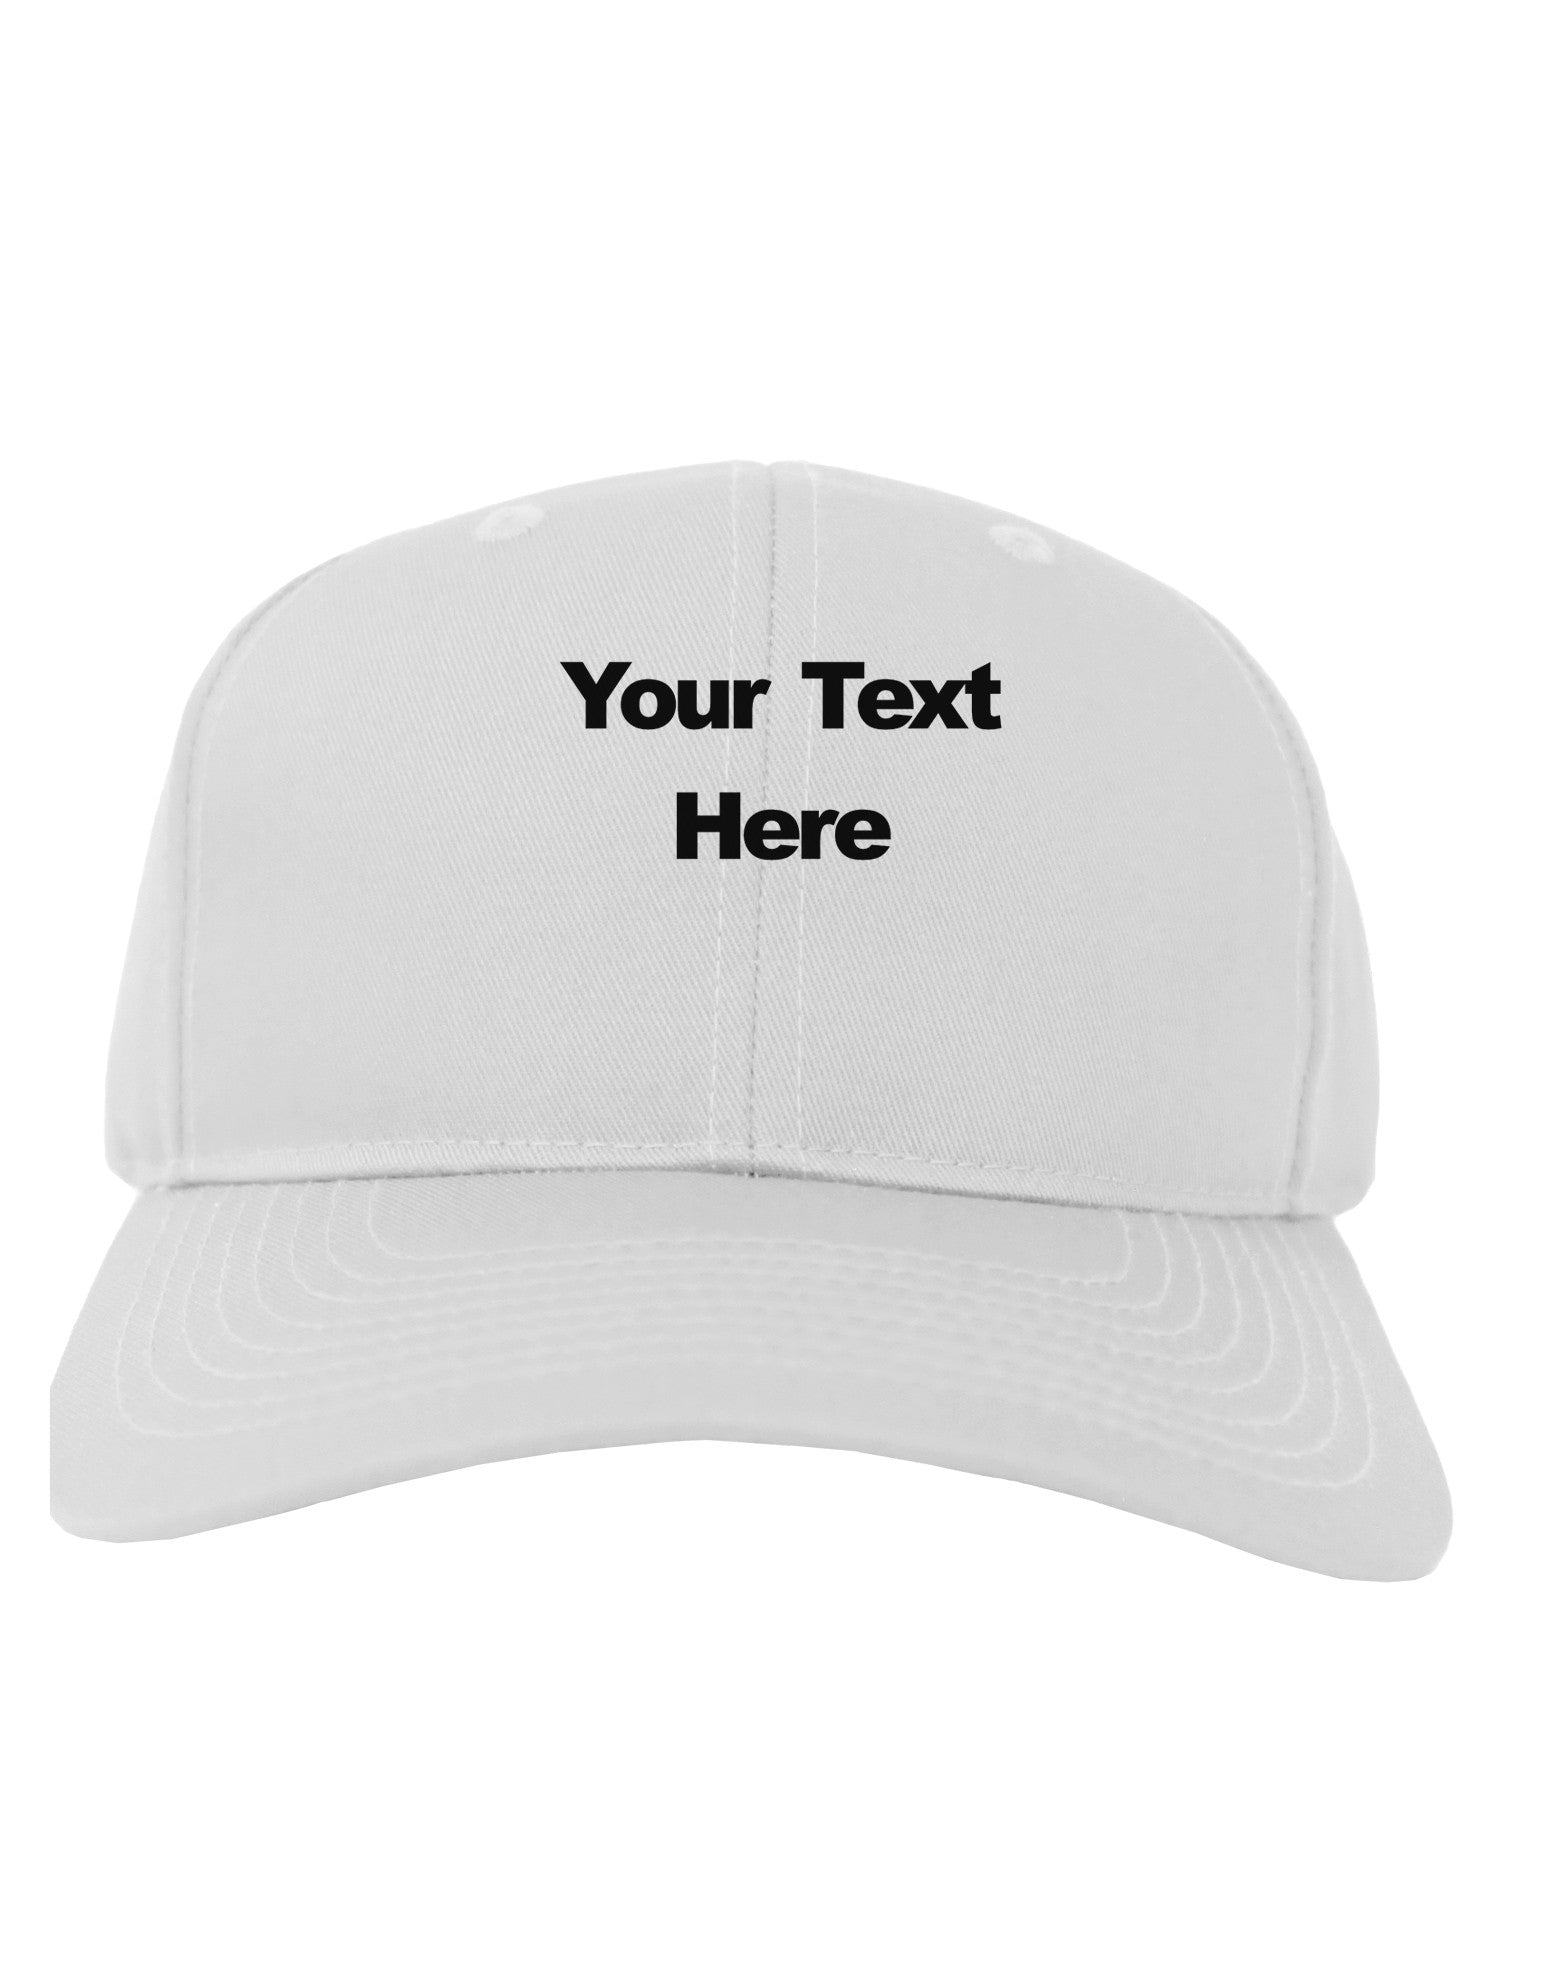 Enter Your Own Words Customized Text Adult Baseball Cap Hat - Davson Sales